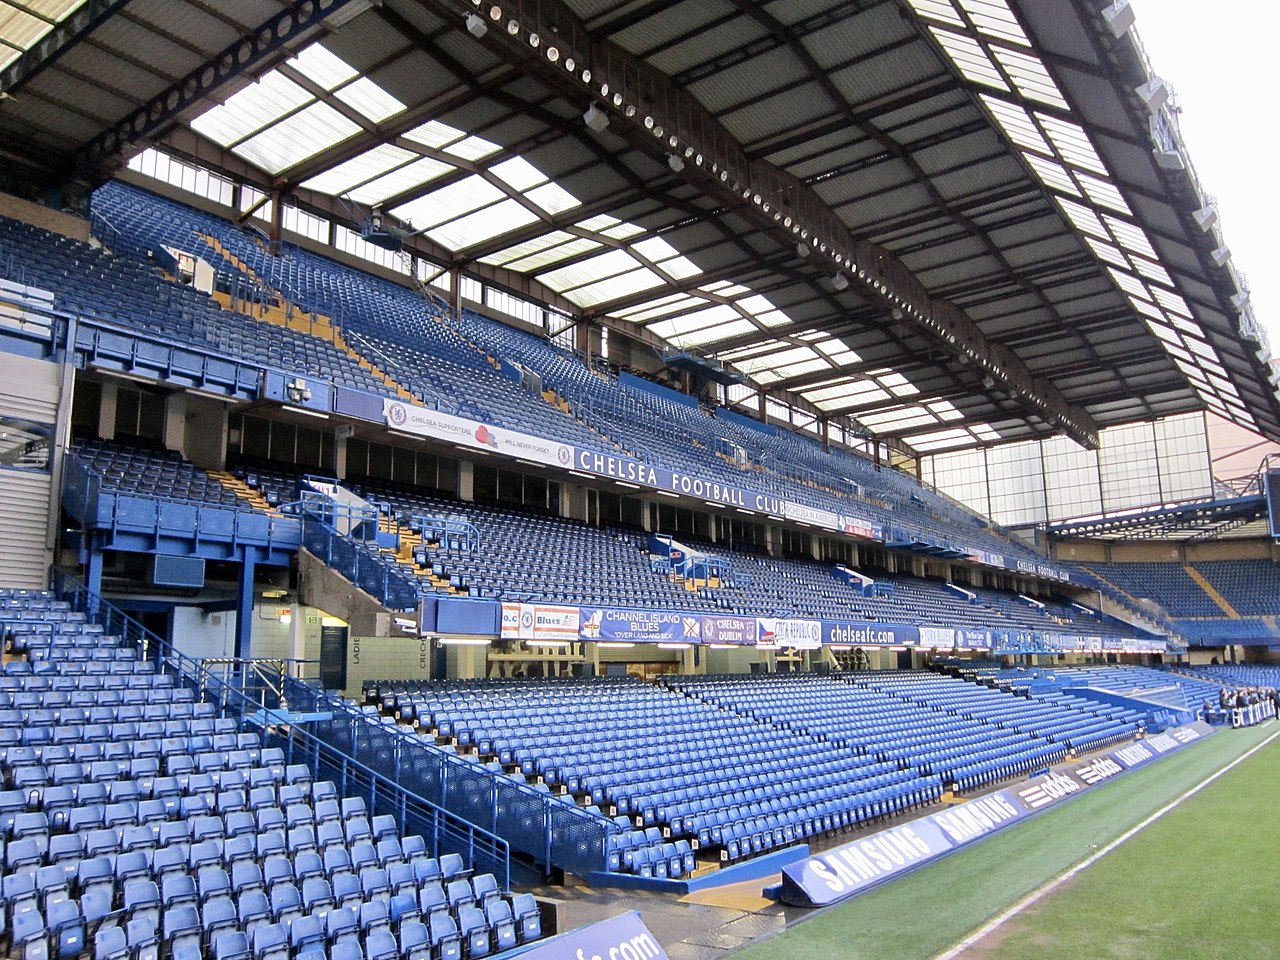 Chelsea Stadium Stamford Bridge- Where Lavia could play next summer unless Liverpool hijack the deal.